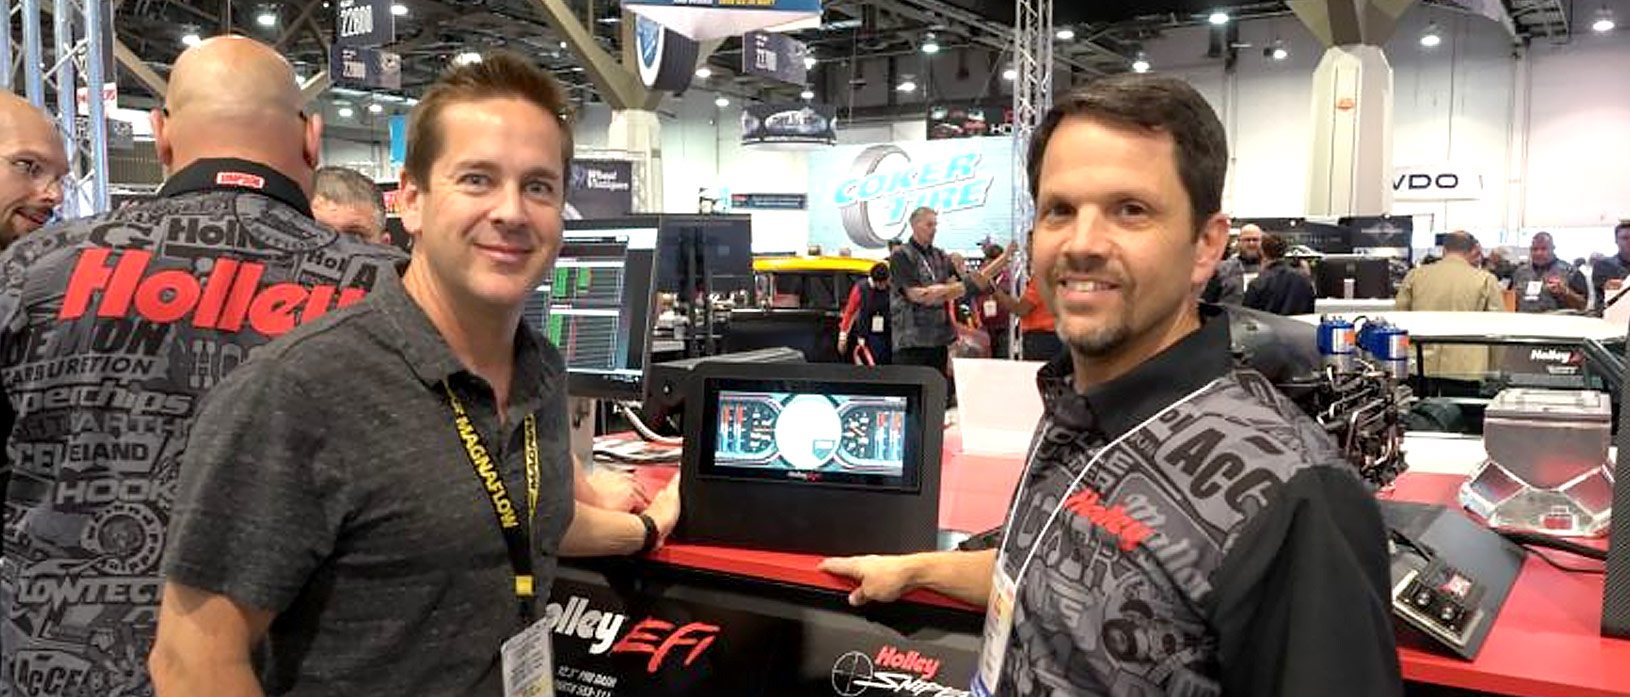 Matt heads back to the SEMA floor to get the latest from ProCharger, Dynavin, Hotchkis, Holley and Lund.